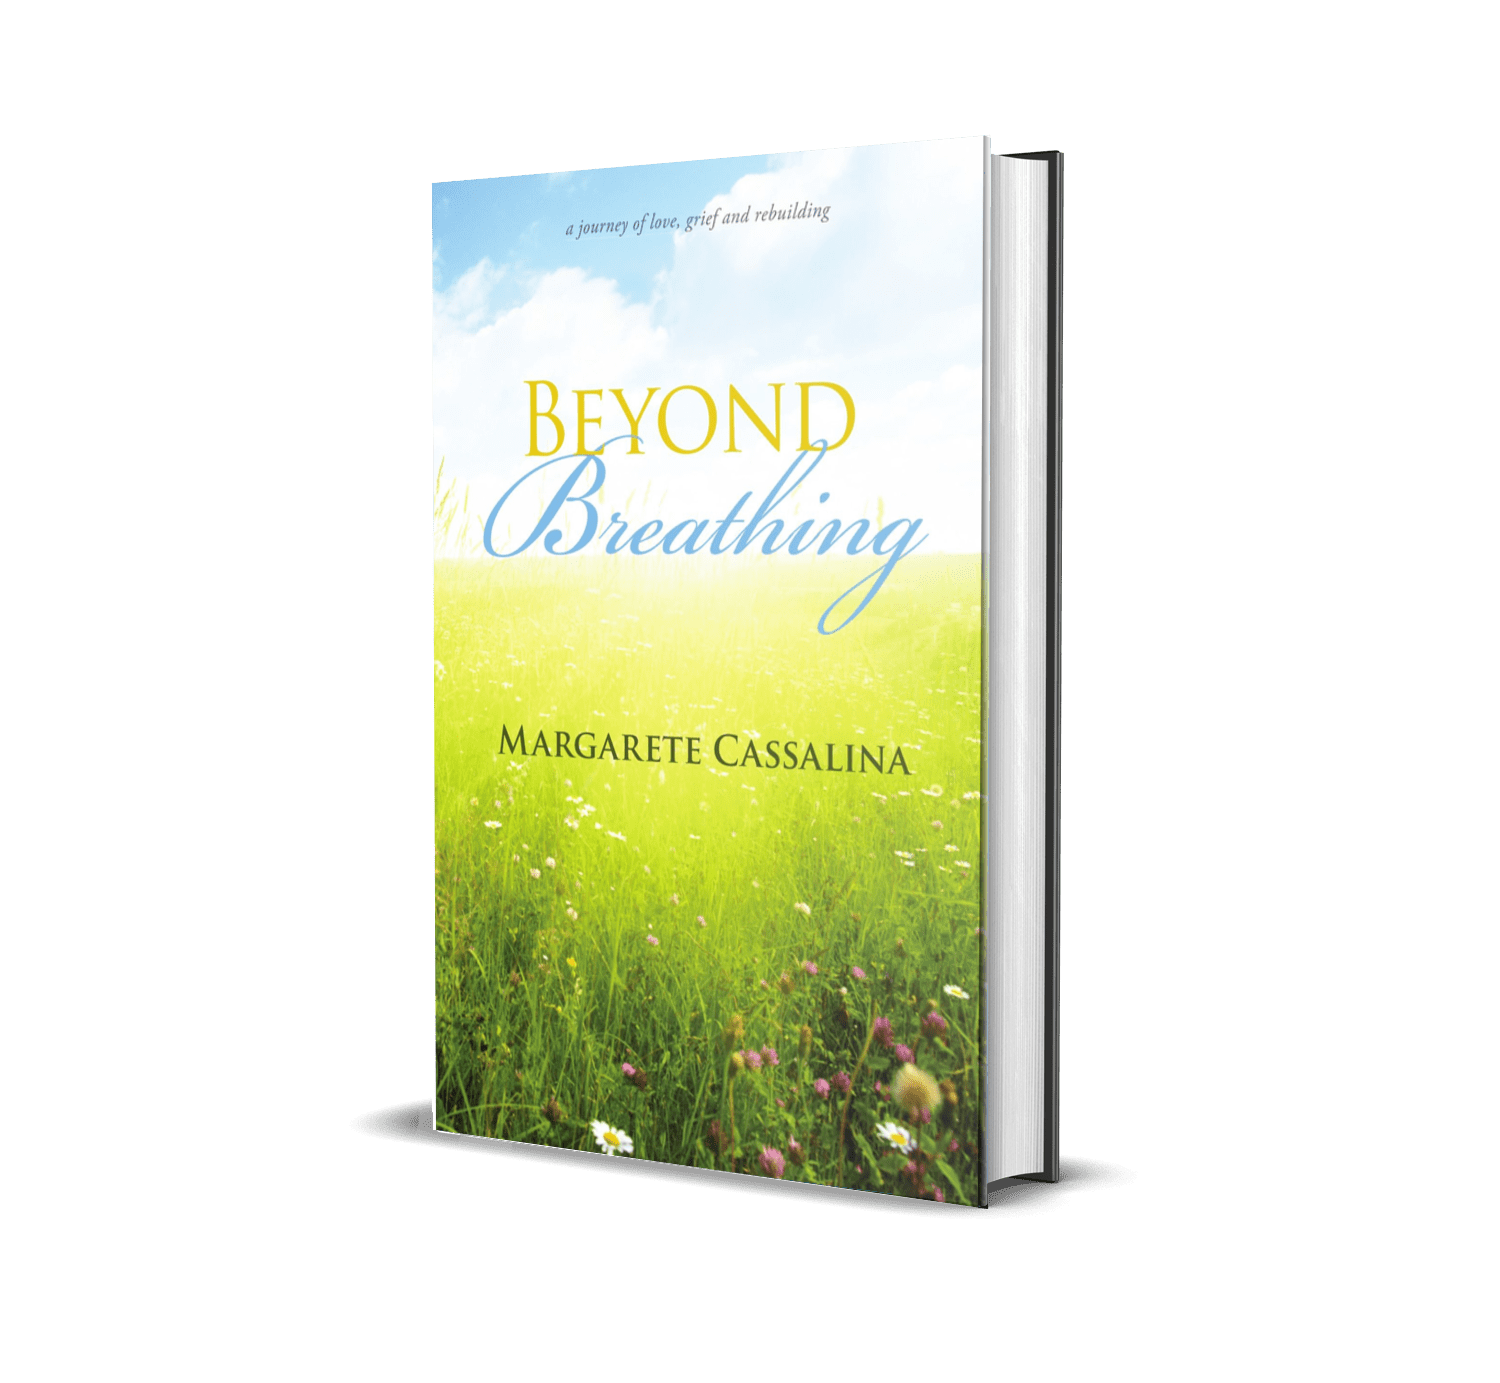 Beyond Breathing book cover shows light shining down on a sunny field